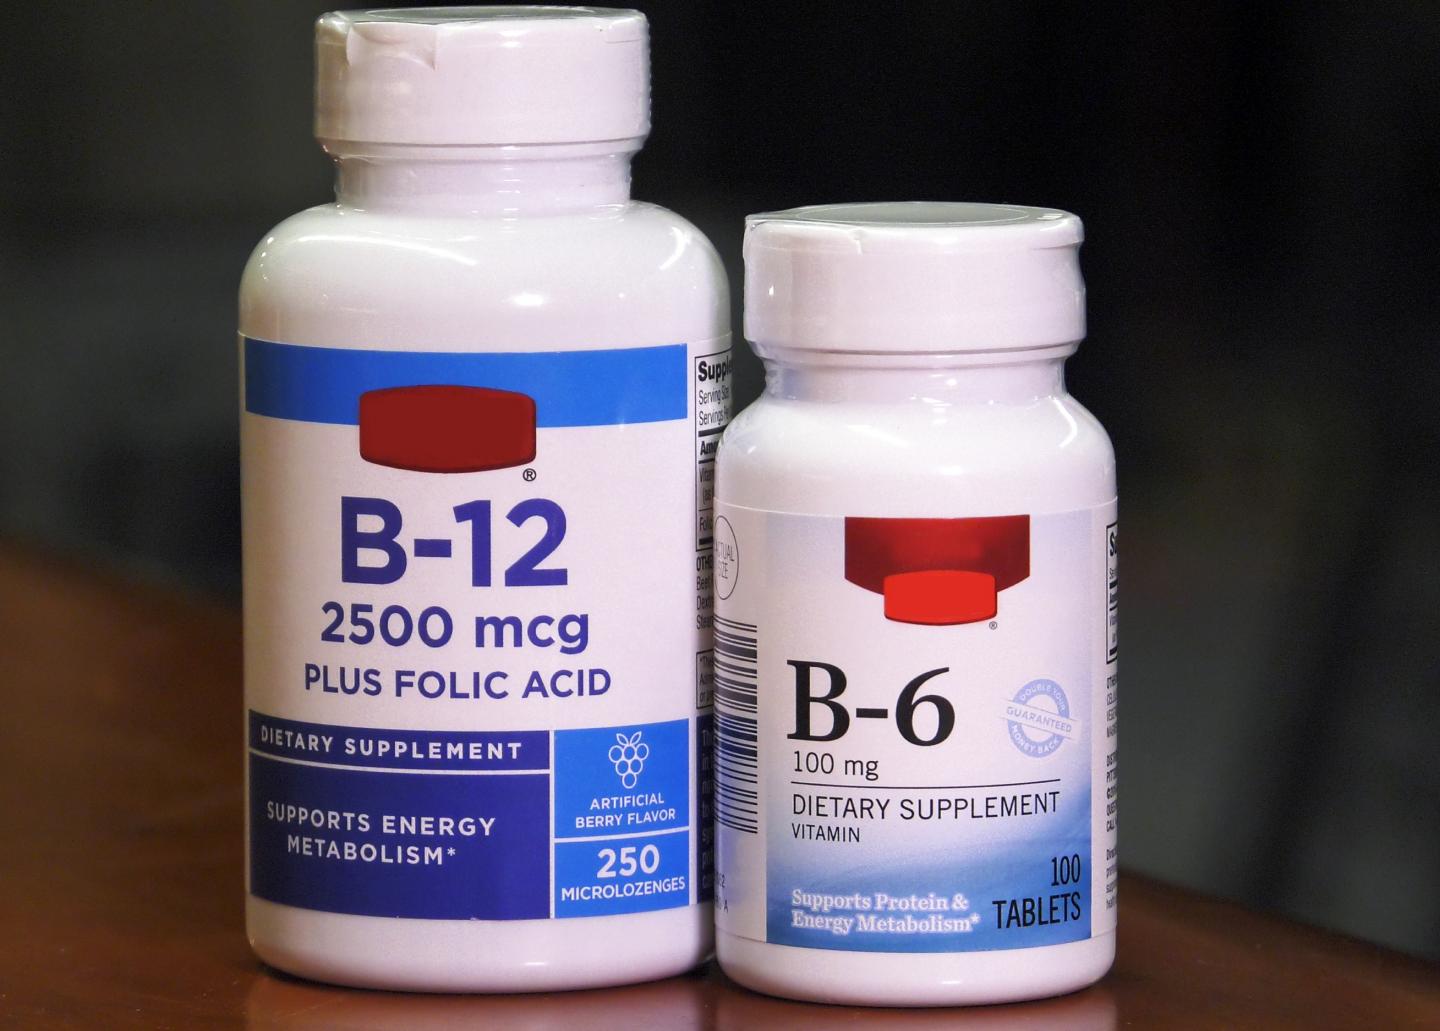 Study: Clear Link Between Heavy Vitamin B Intake and Lung Cancer